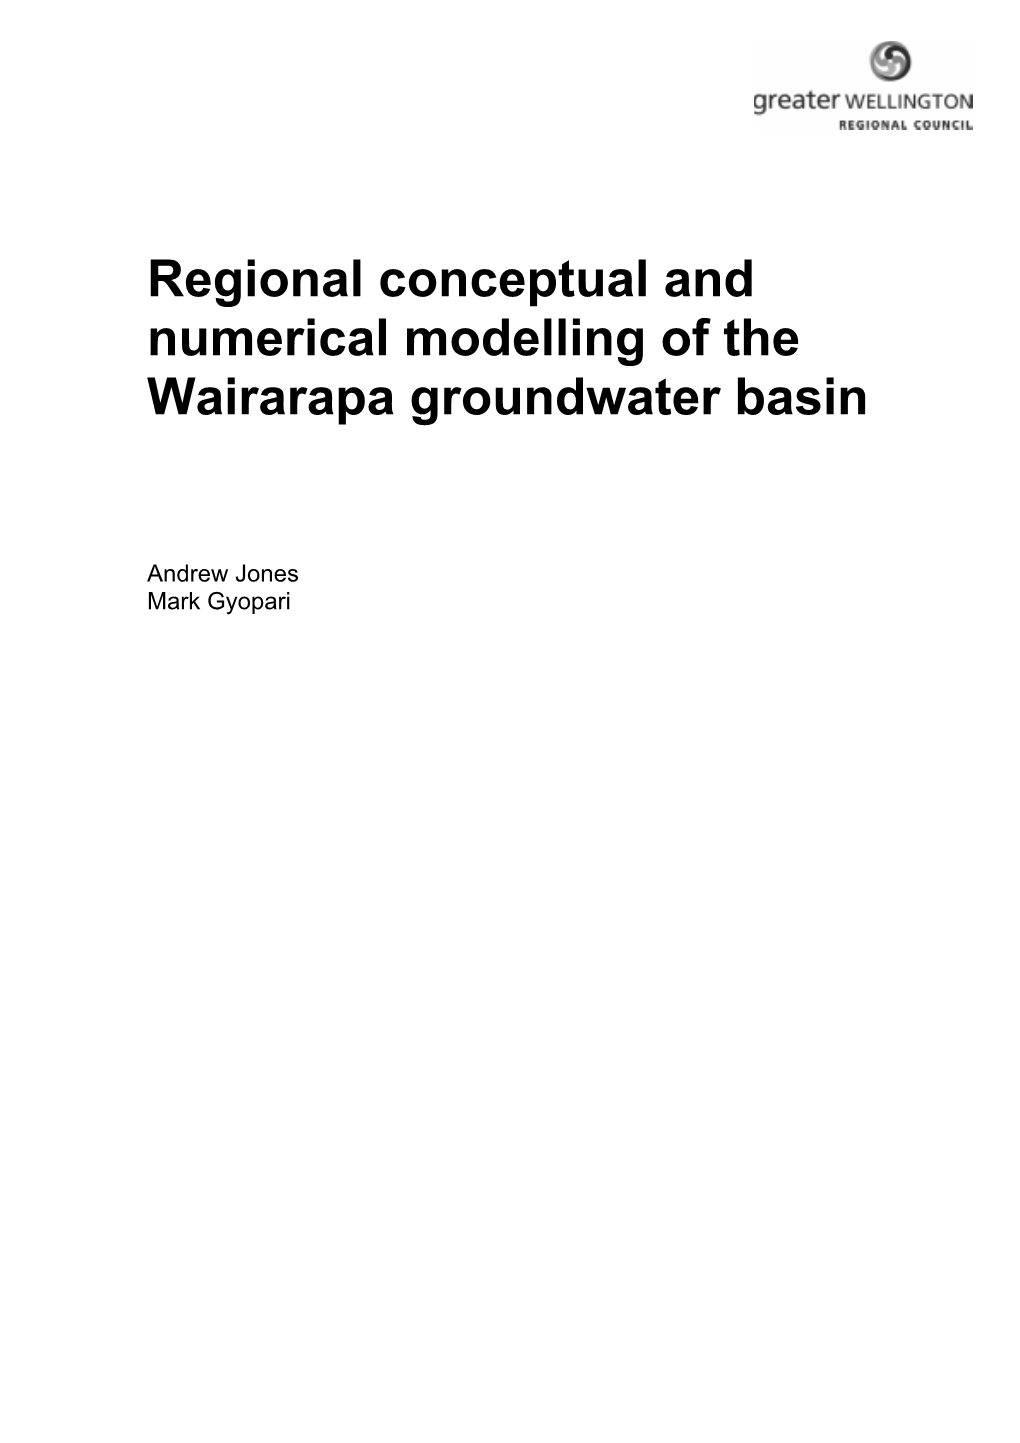 Regional Conceptual and Numerical Modelling of the Wairarapa Groundwater Basin